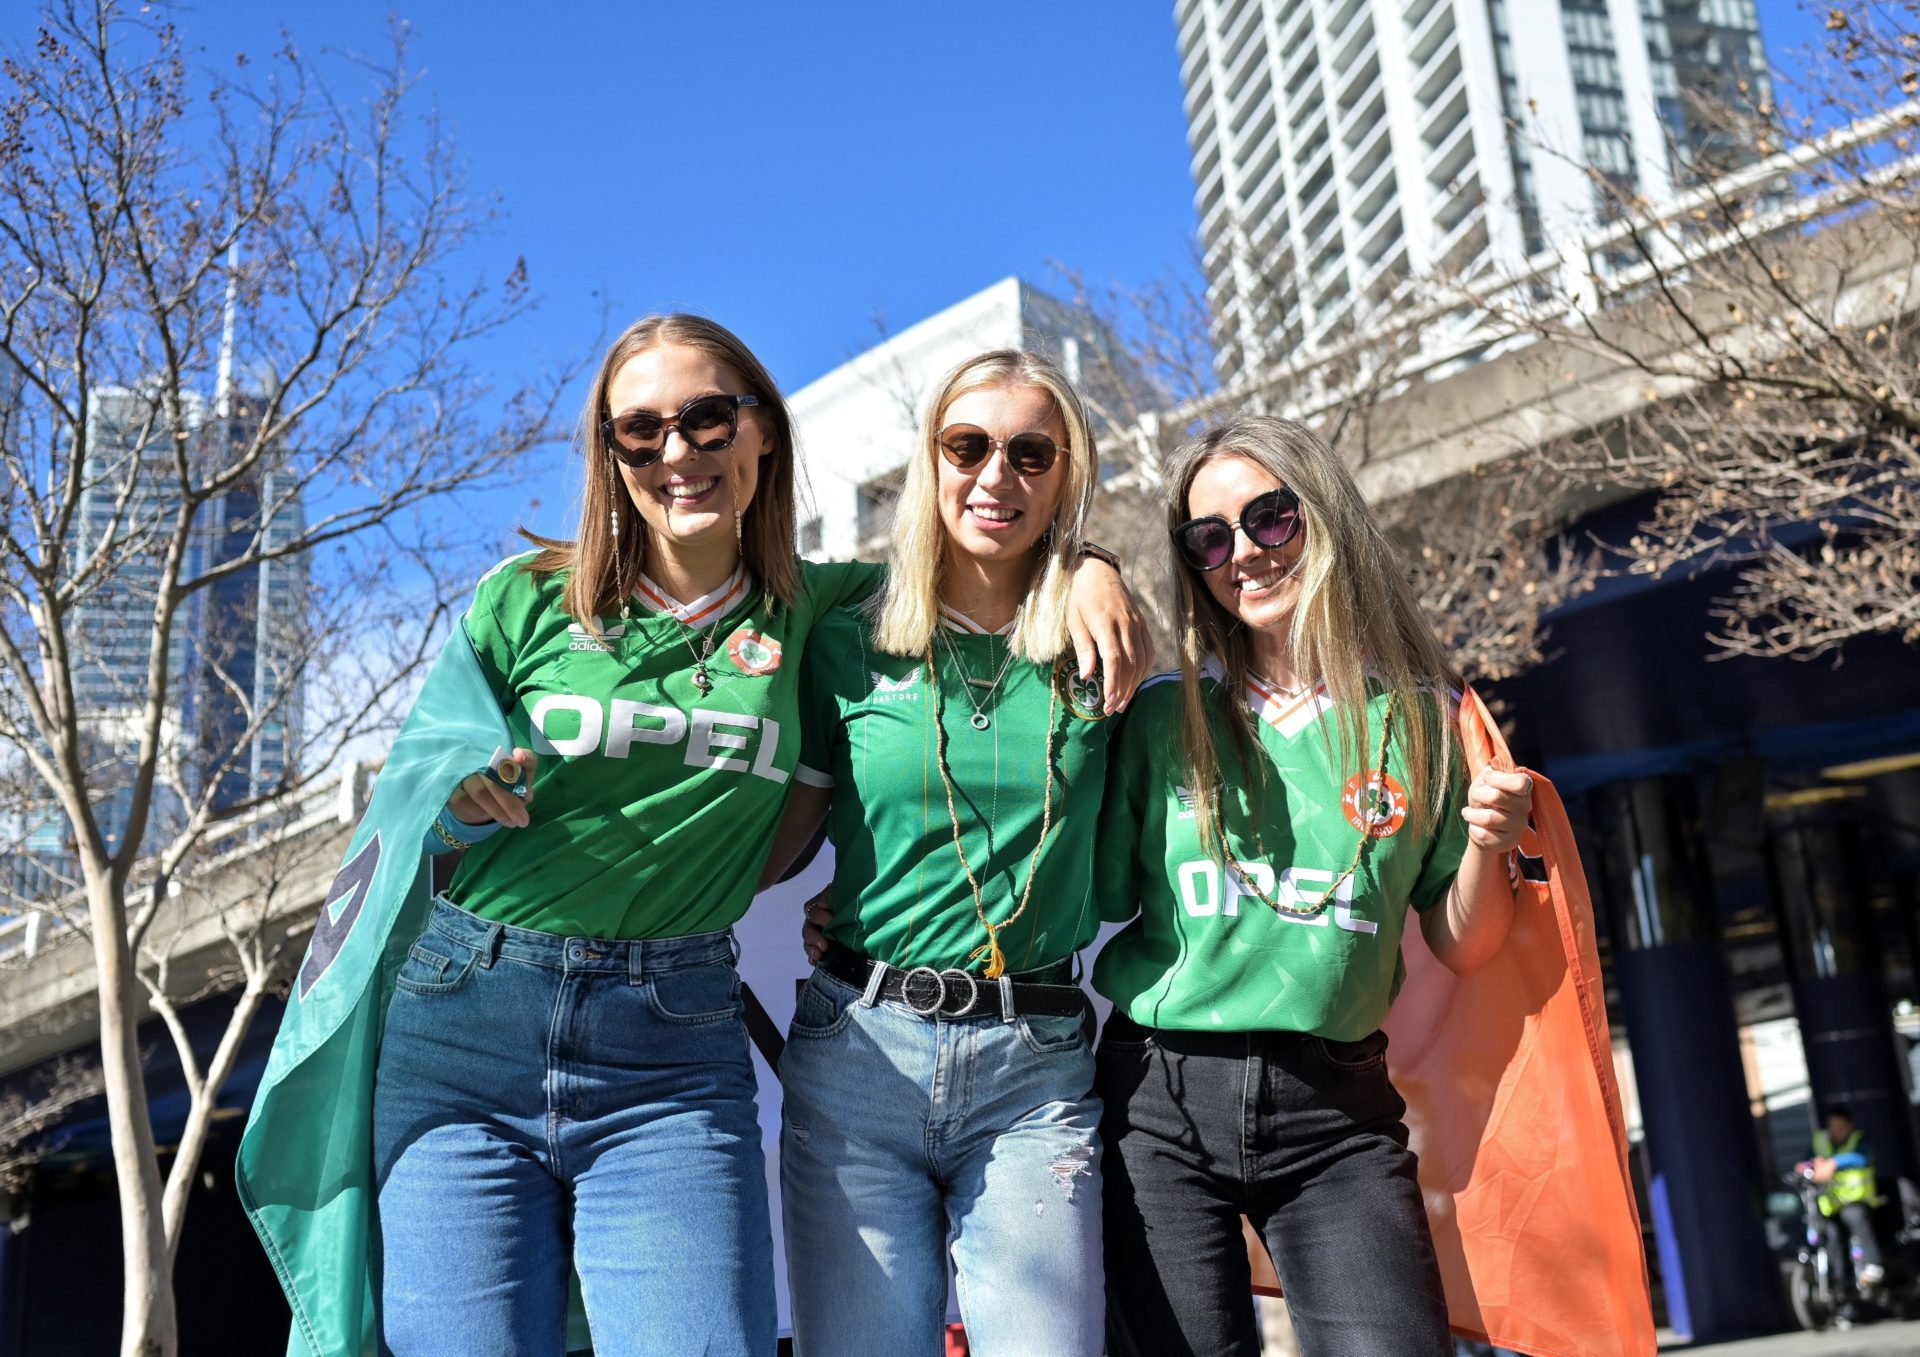 Republic of Ireland supporters in Sydney ahead of the FIFA Women's World Cup 2023 Group B match against Australia, 20-07-2023. Image: Mick O'Shea/Sportsfile